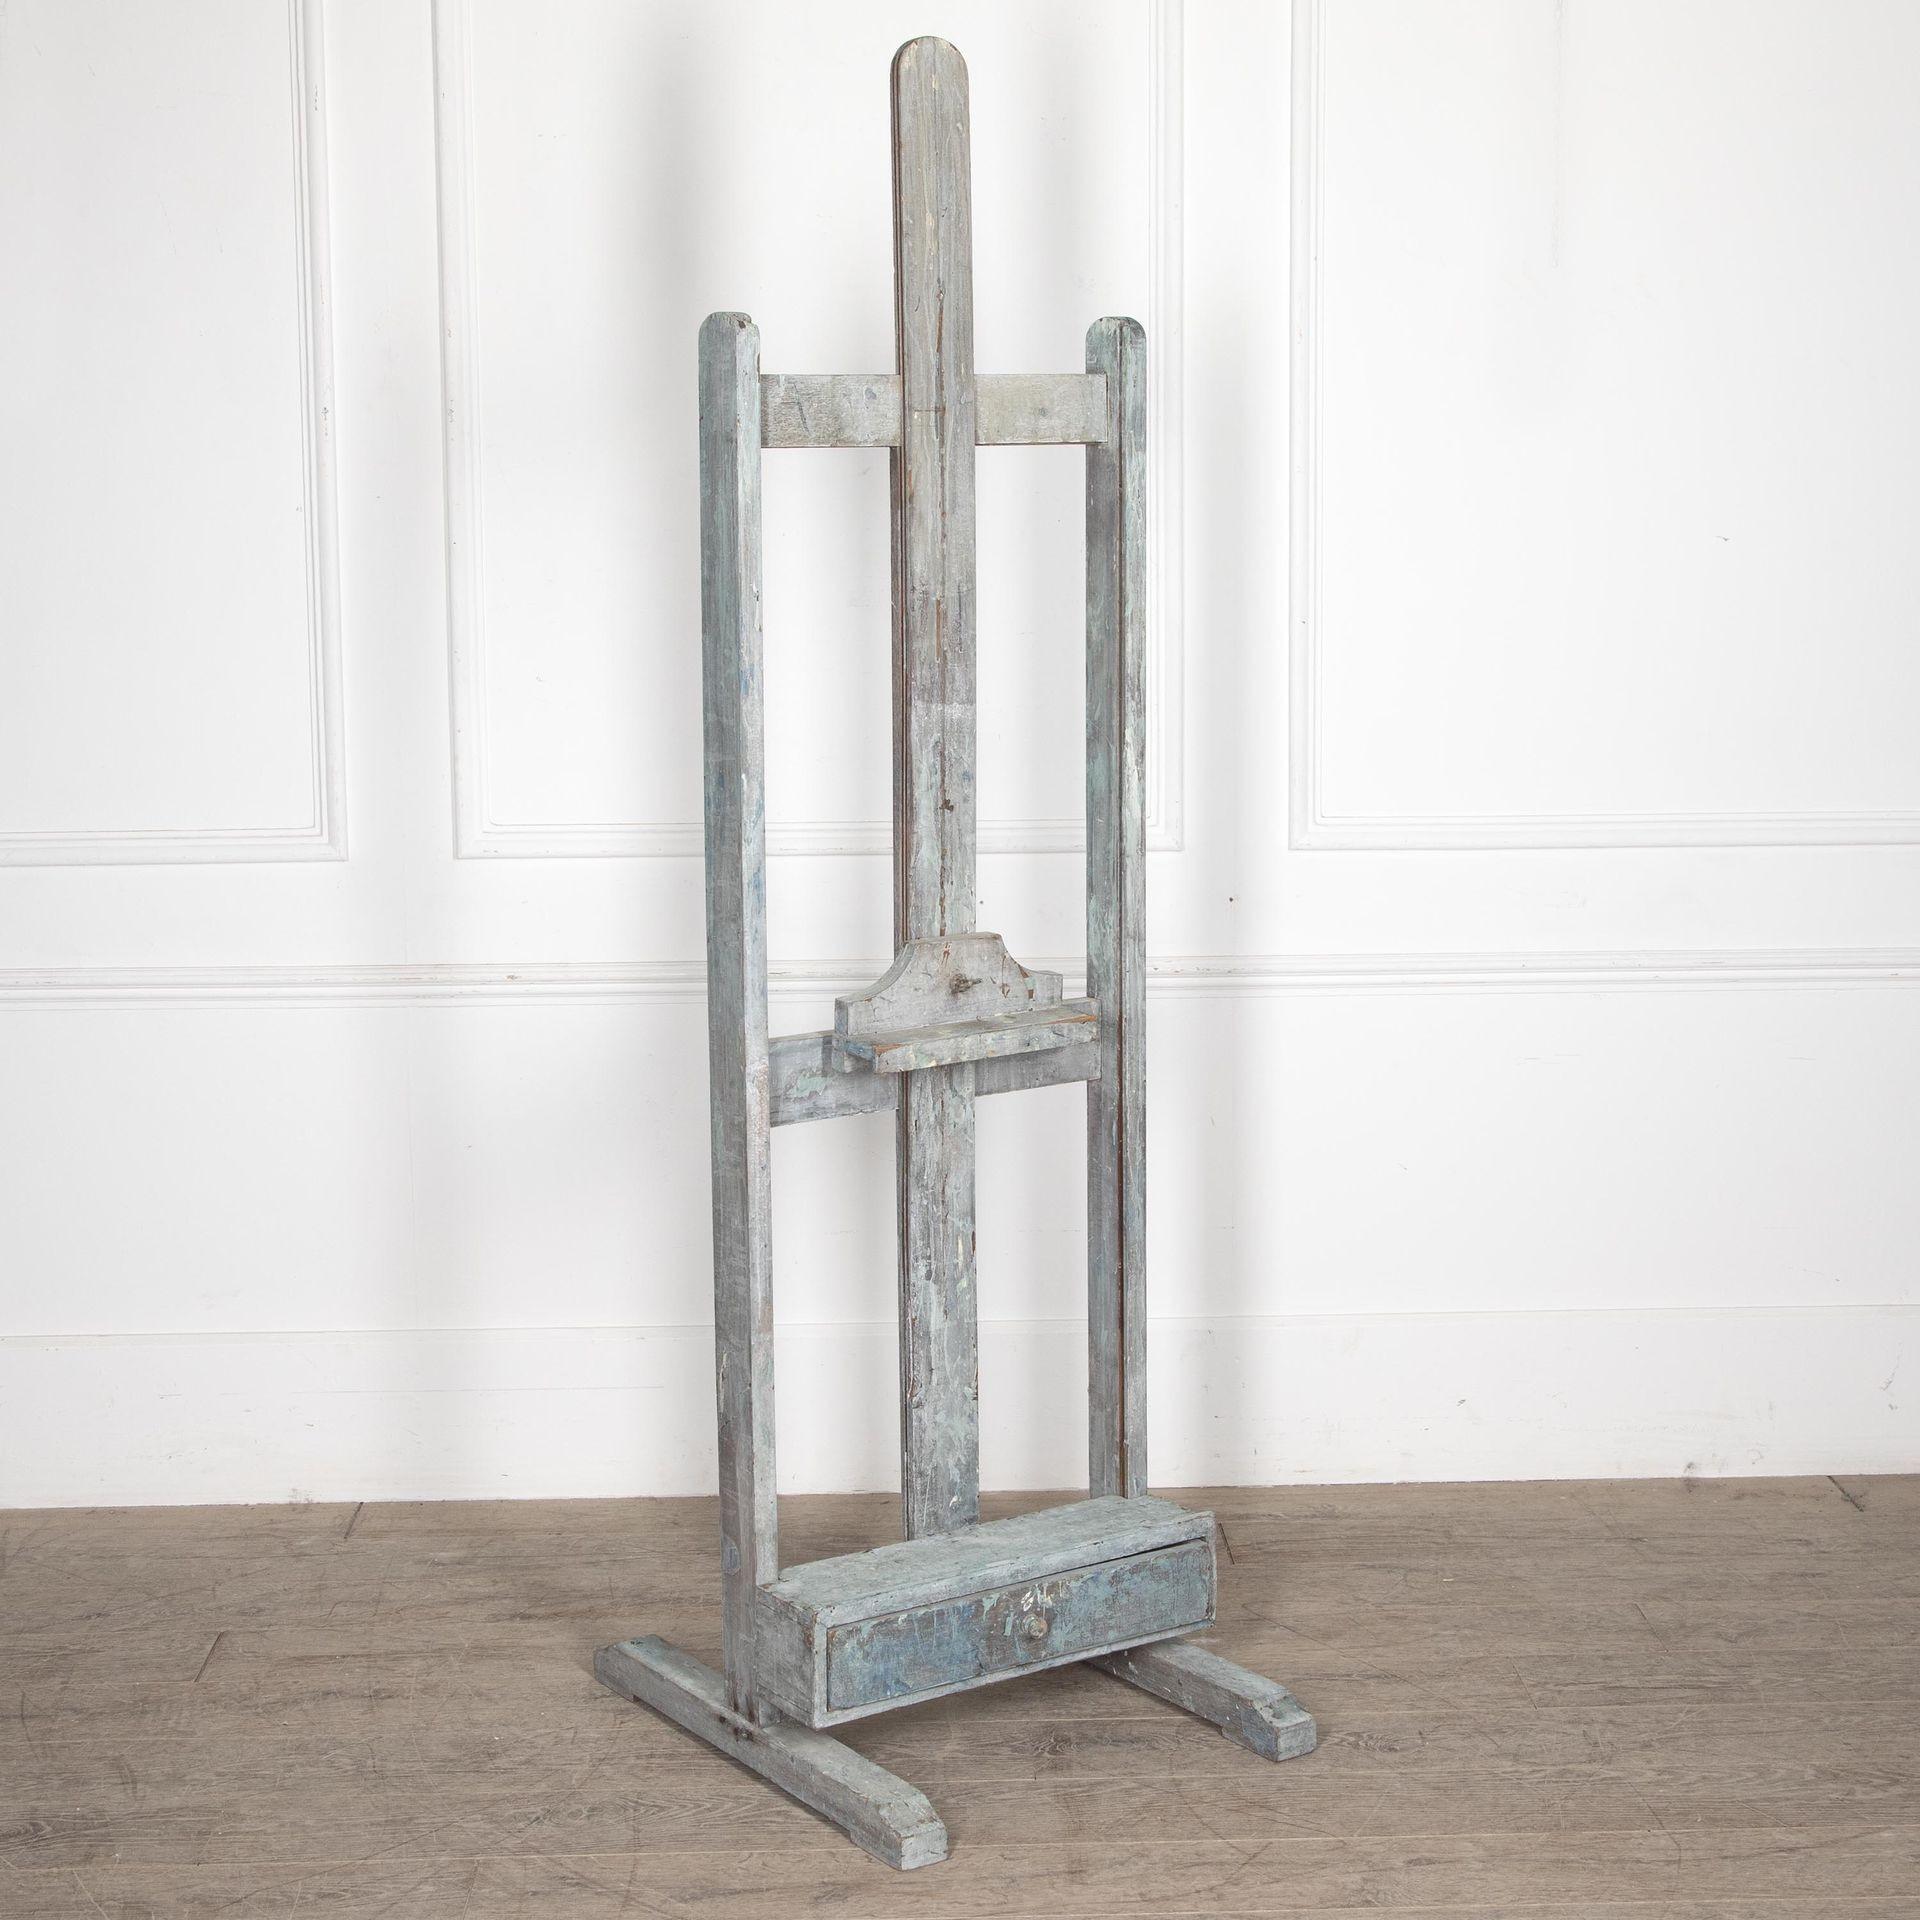 Late 19th Century French Artist’s easel with drawer.
Circa 1900.
There are chips to each front corner of the picture support rail at the front exposing the timber below.
There are open joints between the drawer linings either side and the drawer